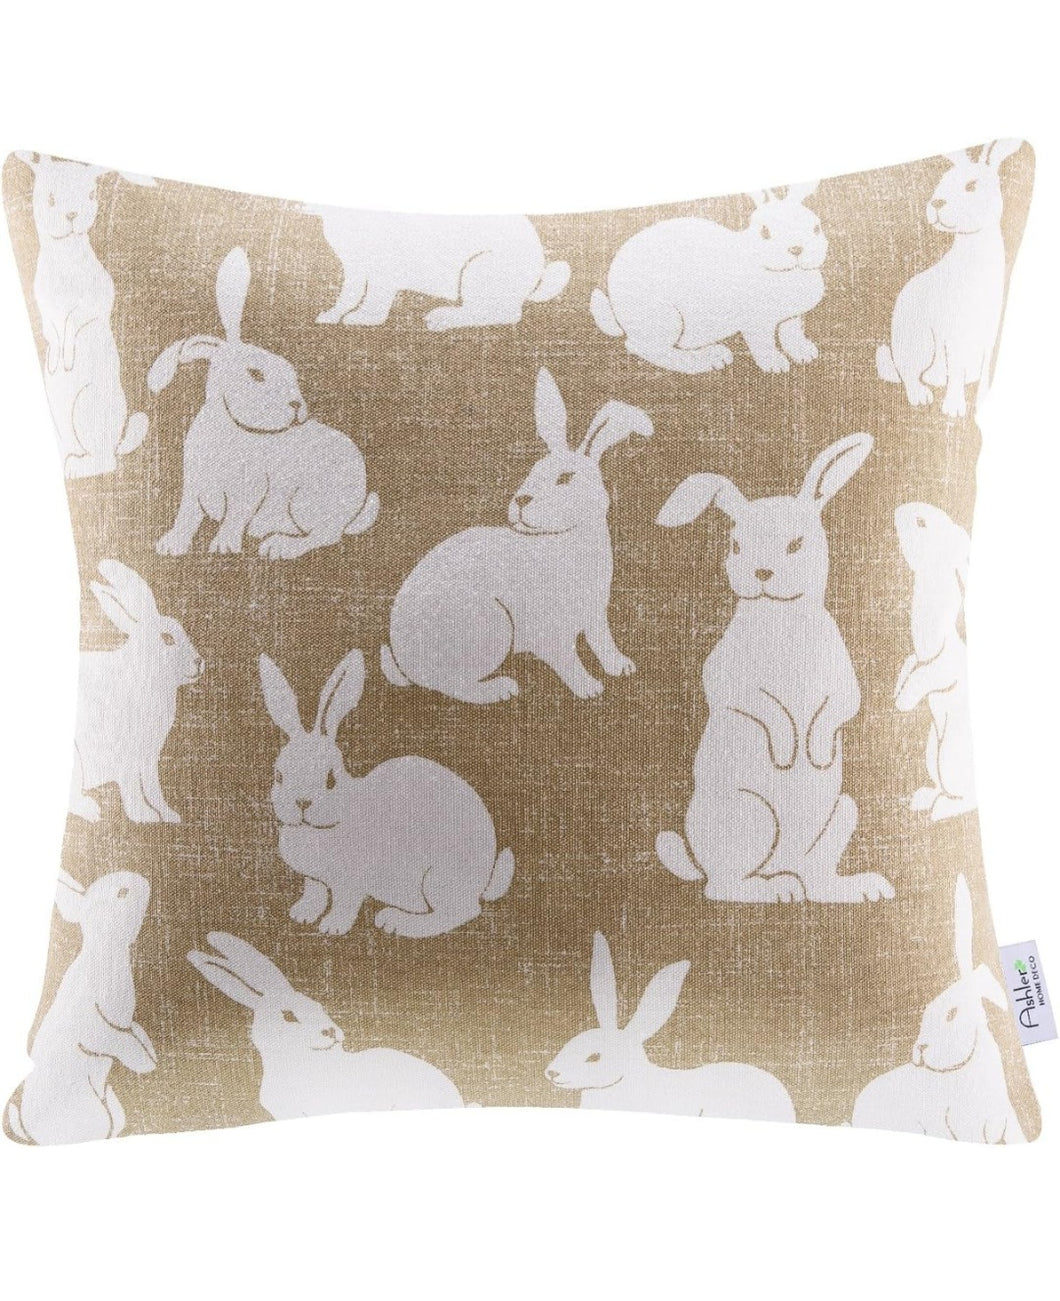 Tan and White Mini Bunnies Pillow Cover